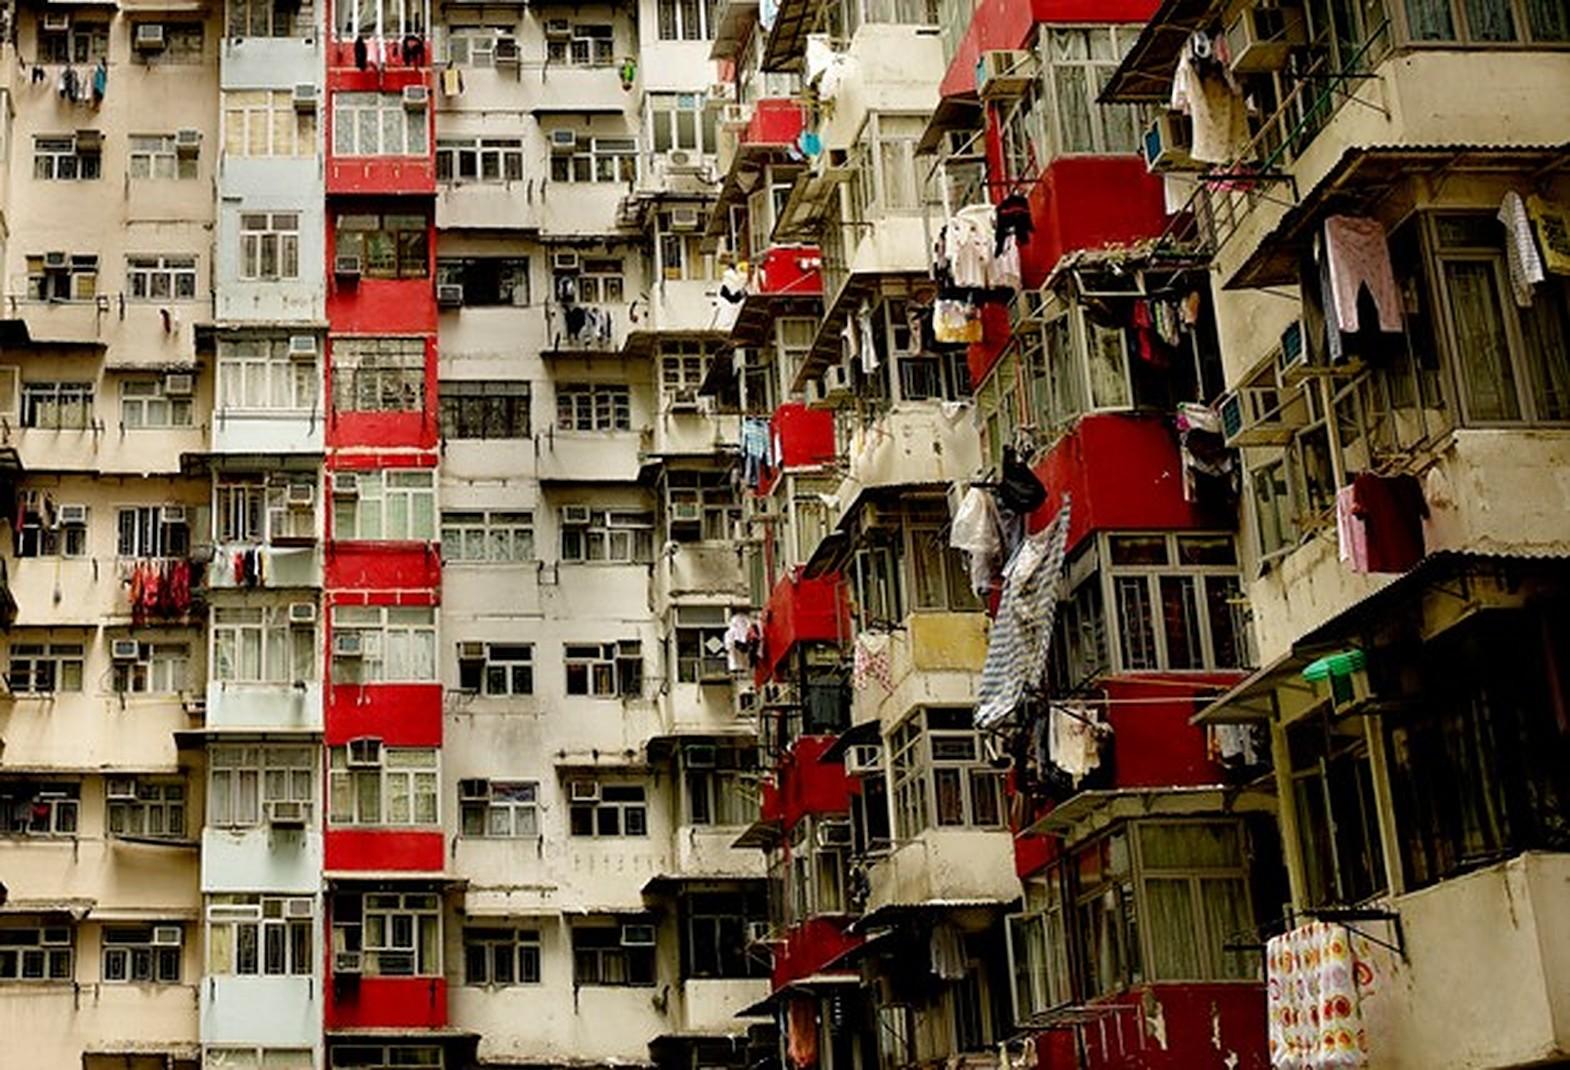 Please bear in mind that all prints are produced to order and lead times are between 15-20 days.

Hong Kong Apartments II is a dynamic C-Type Matte Print by Contemporary photographer Chris Frazer Smith.
It is available in this size in an Edition of